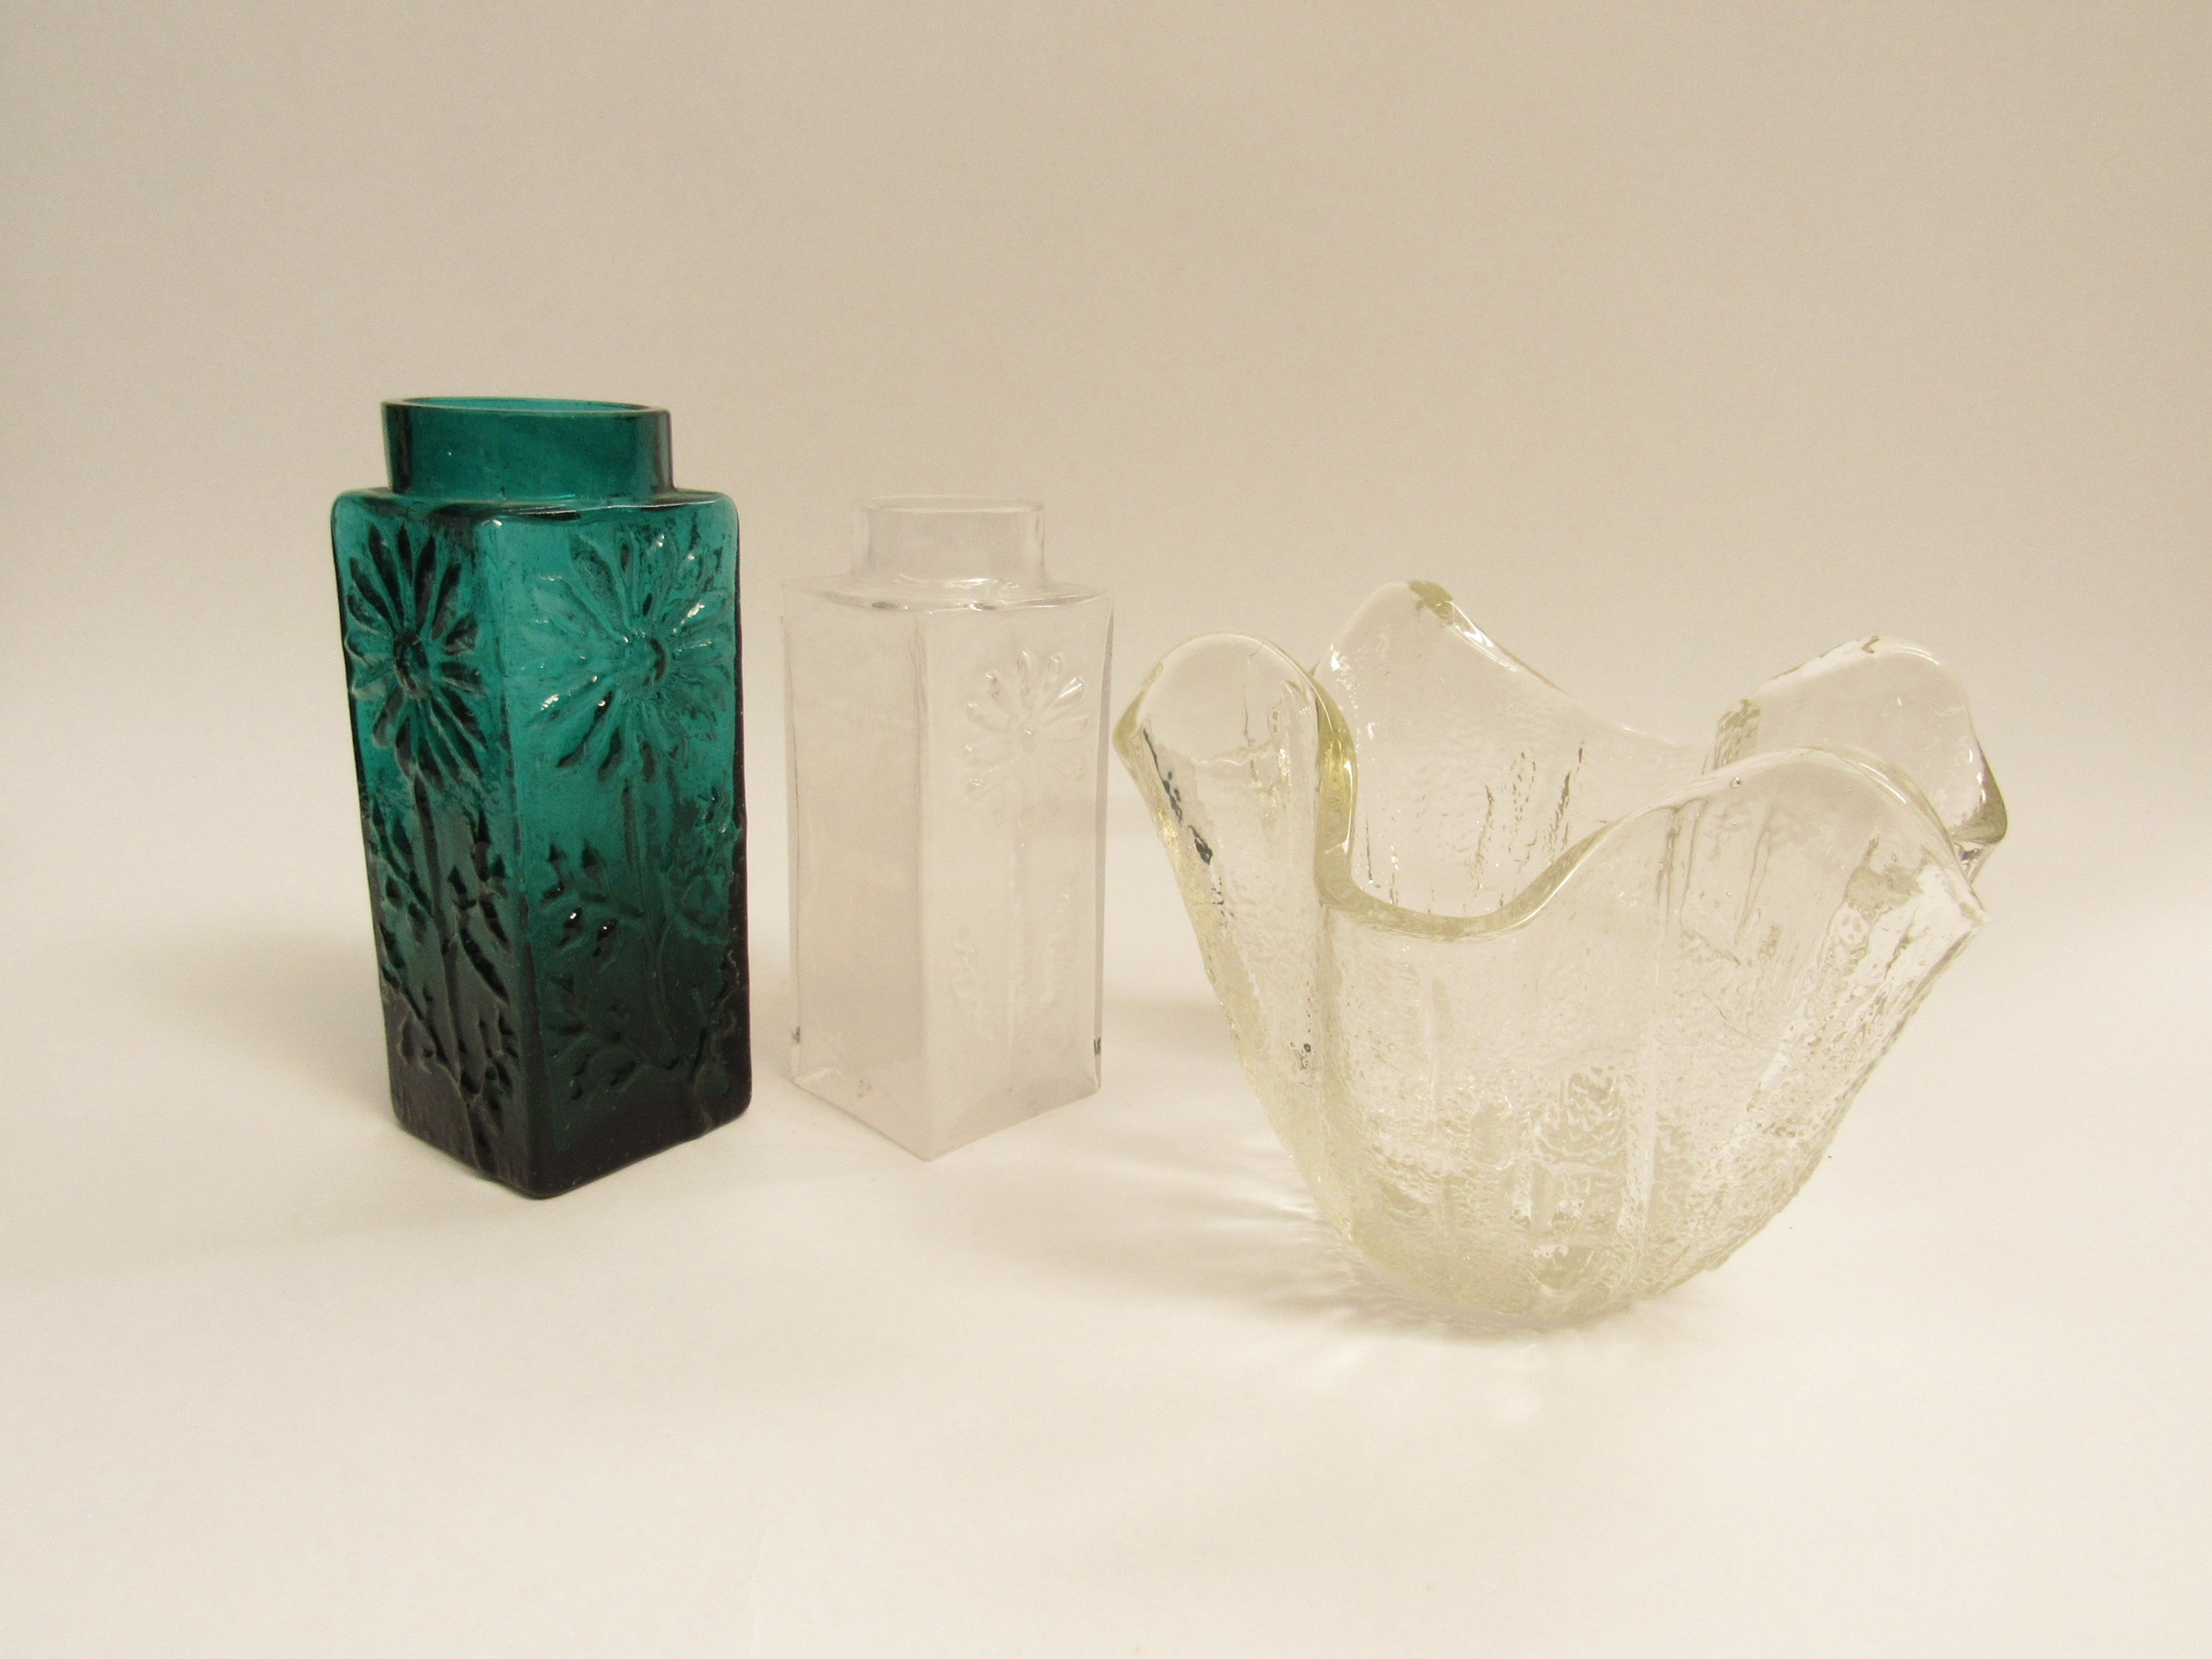 Two Dartington Glass flower vases by Frank Thrower and a clear glass handkerchief vase with